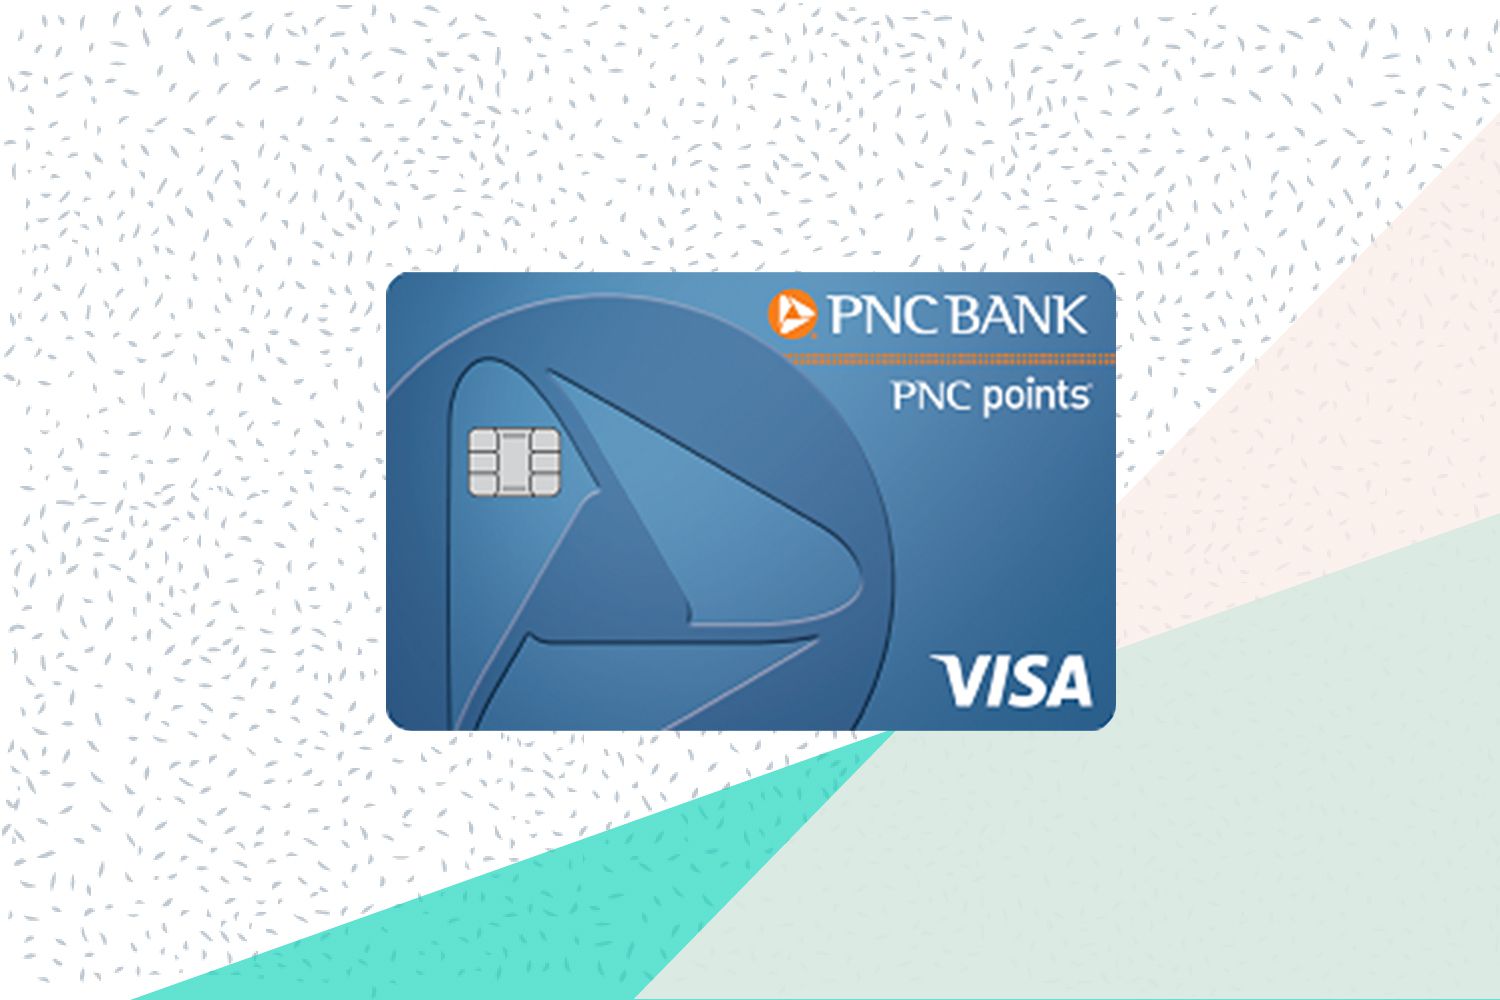 Learn How to Apply for a PNC Credit Card - PNC Points Visa